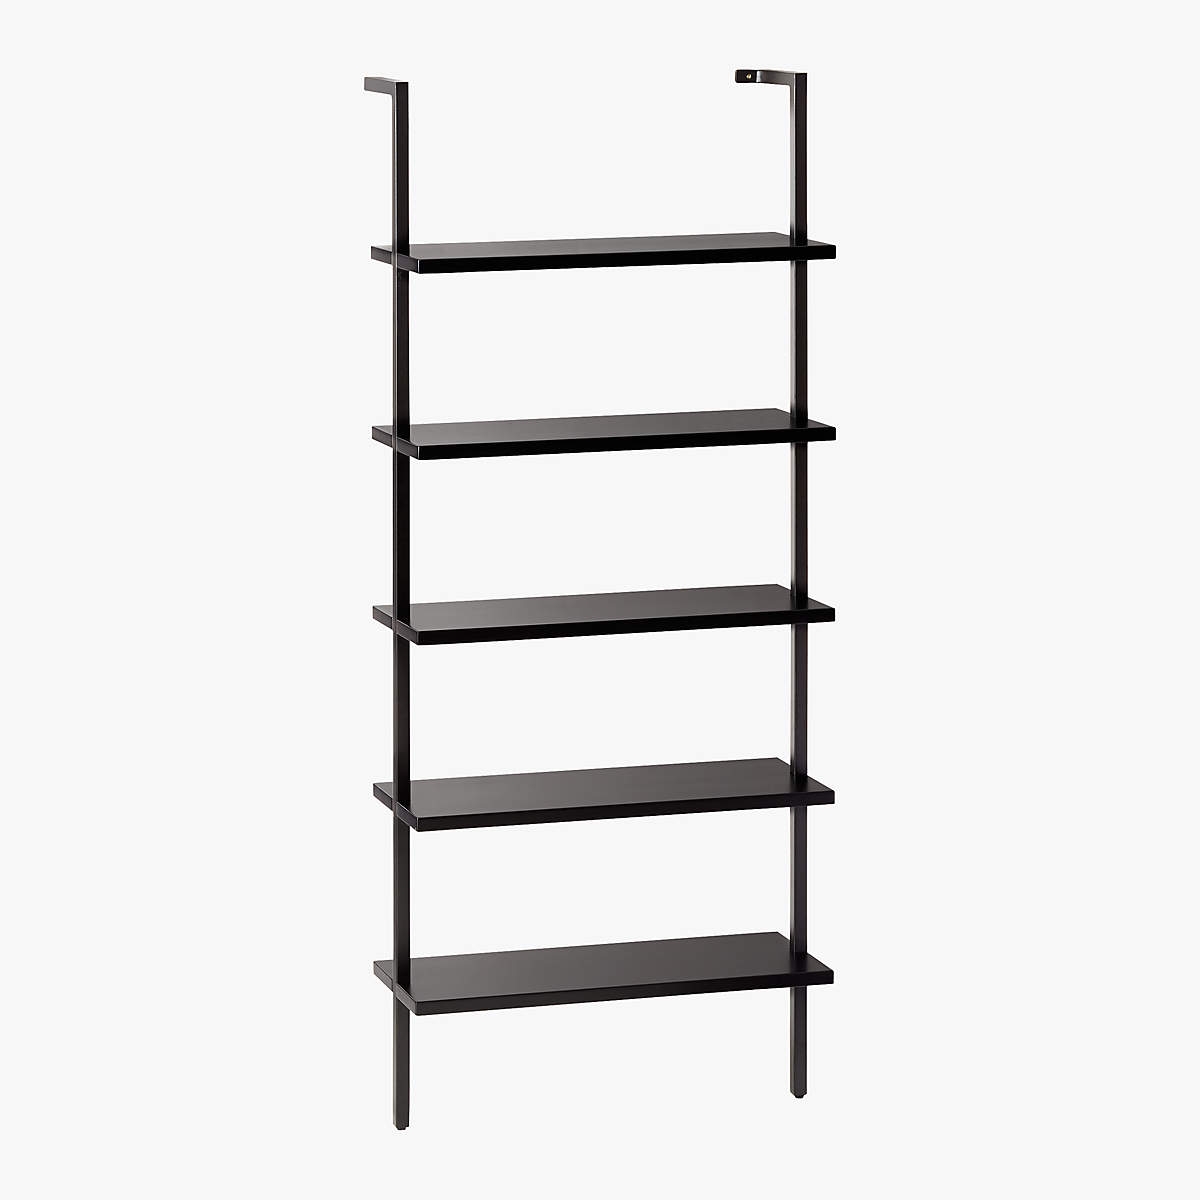 Stairway Black Wall-Mounted Bookcase - 72.5" Height - Image 1